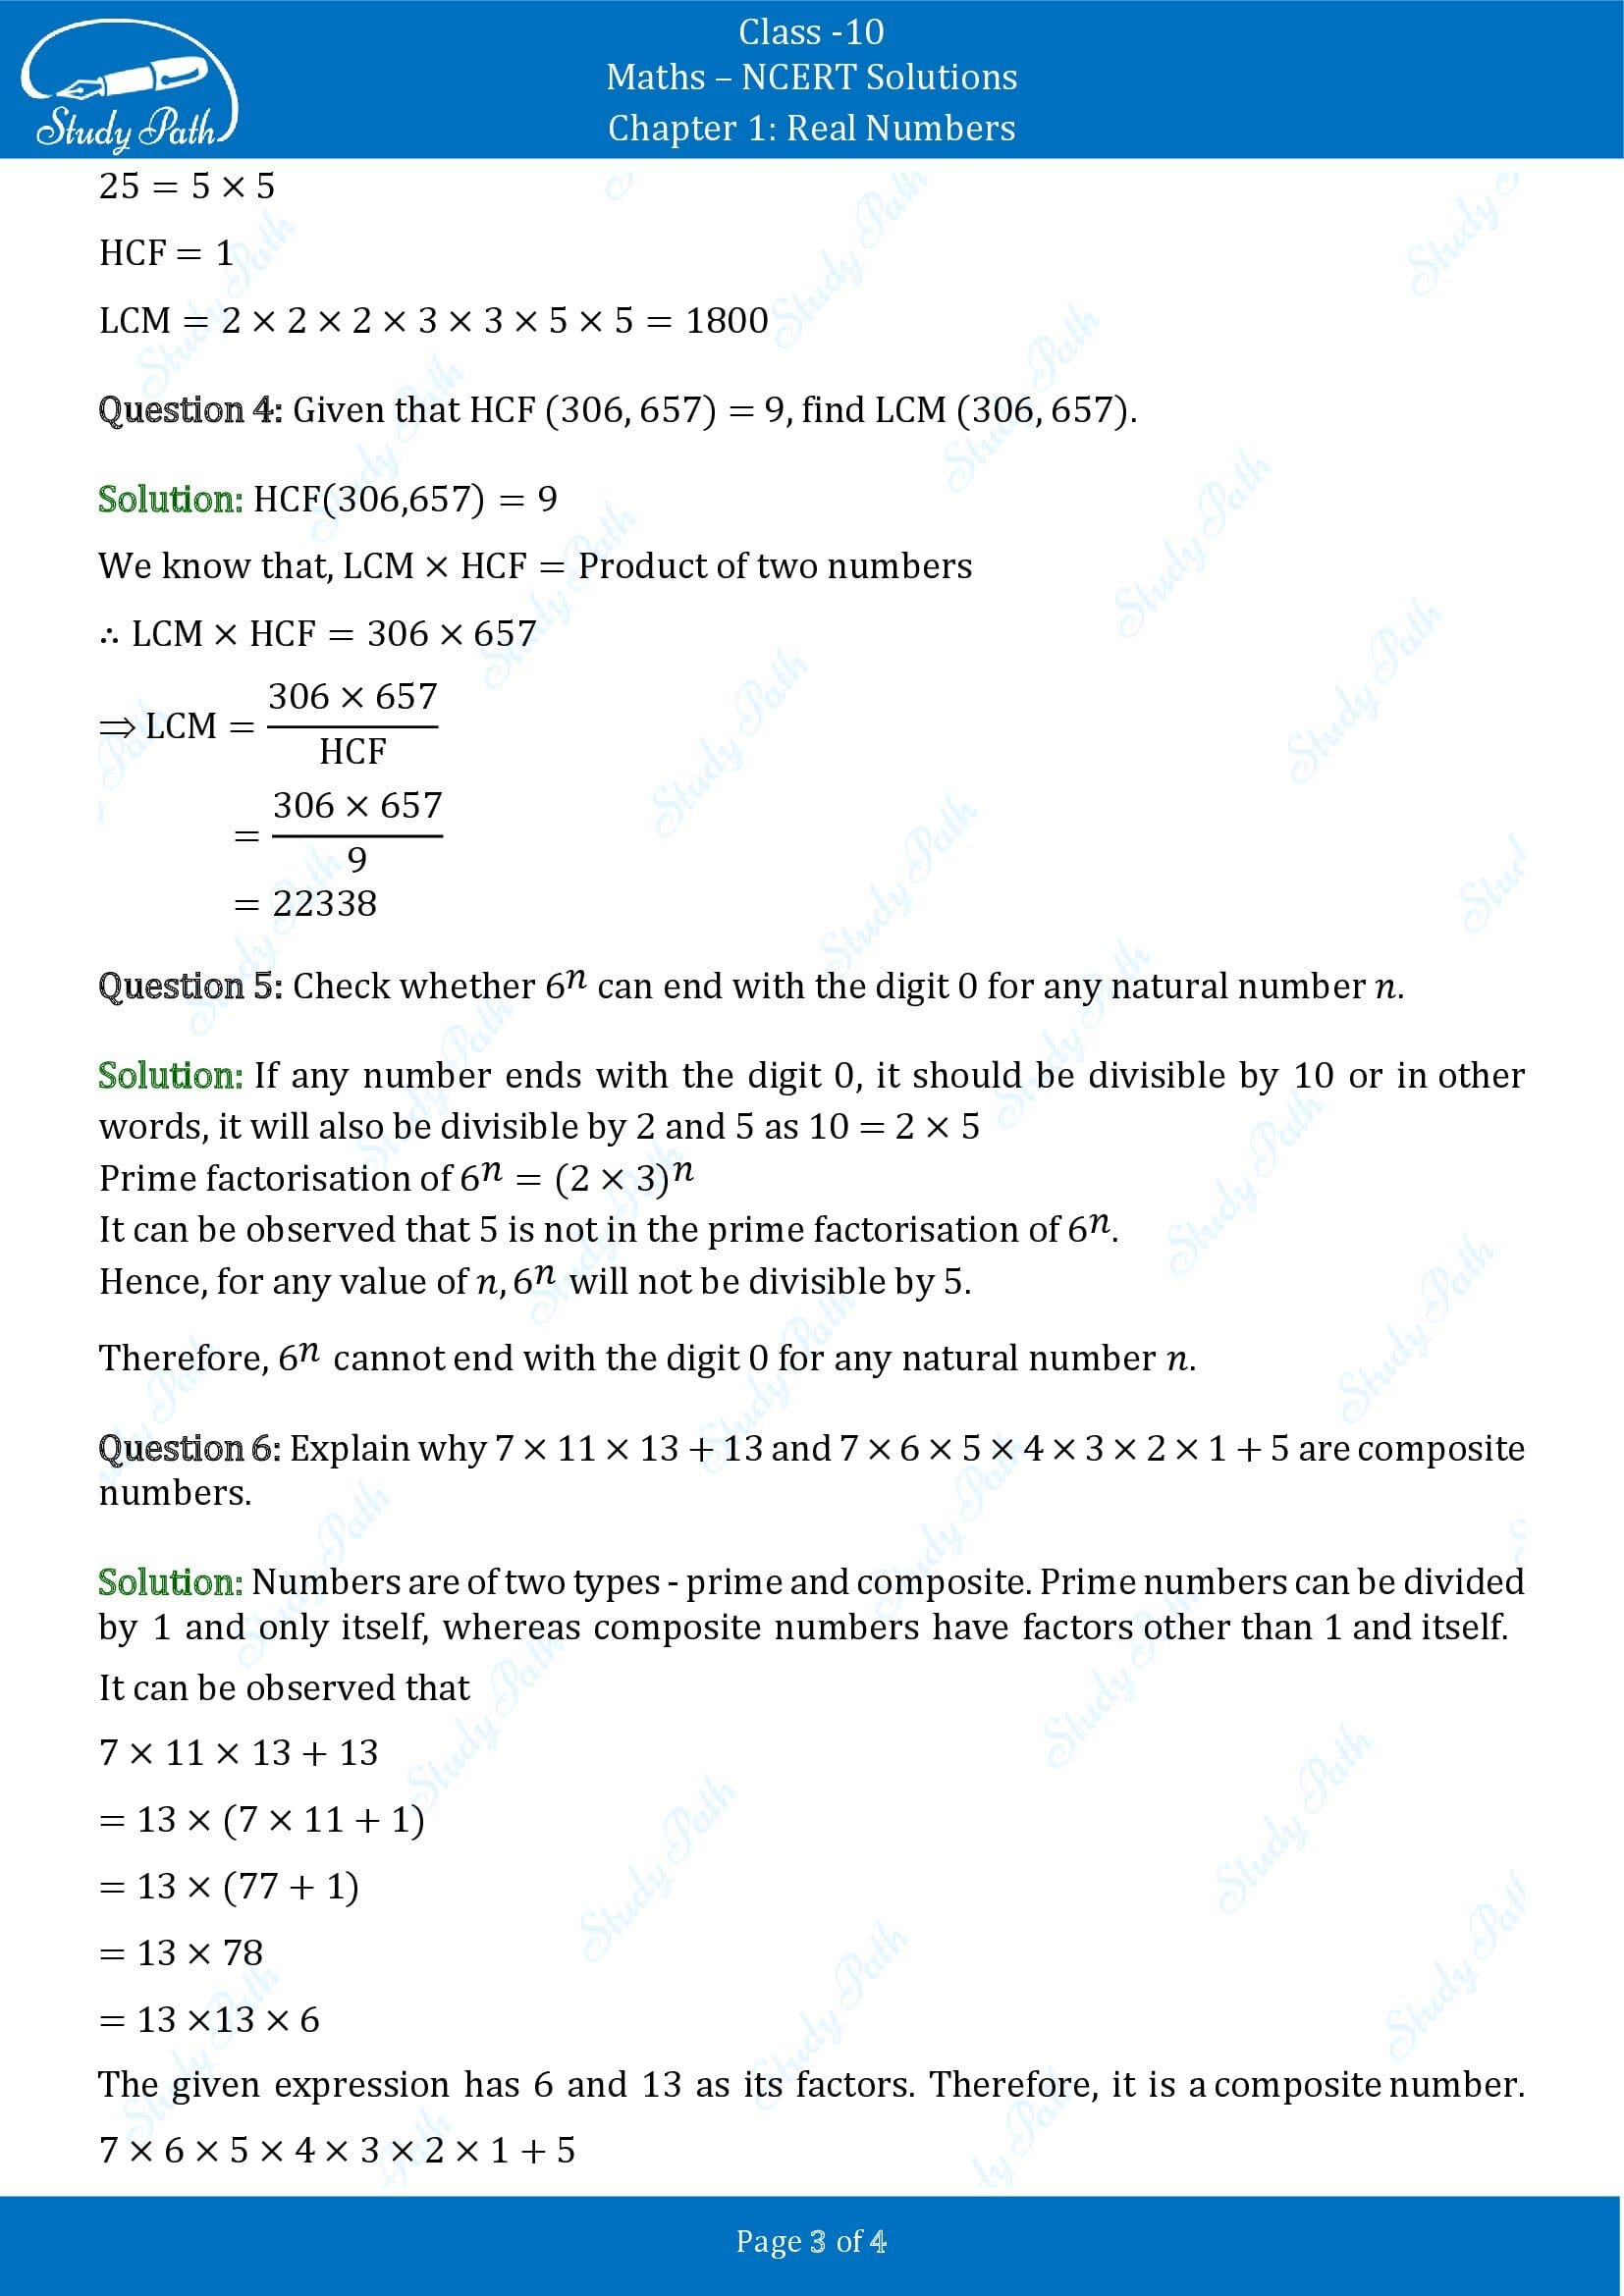 NCERT Solutions for Class 10 Maths Chapter 1 Real Numbers Exercise 1.2 00003